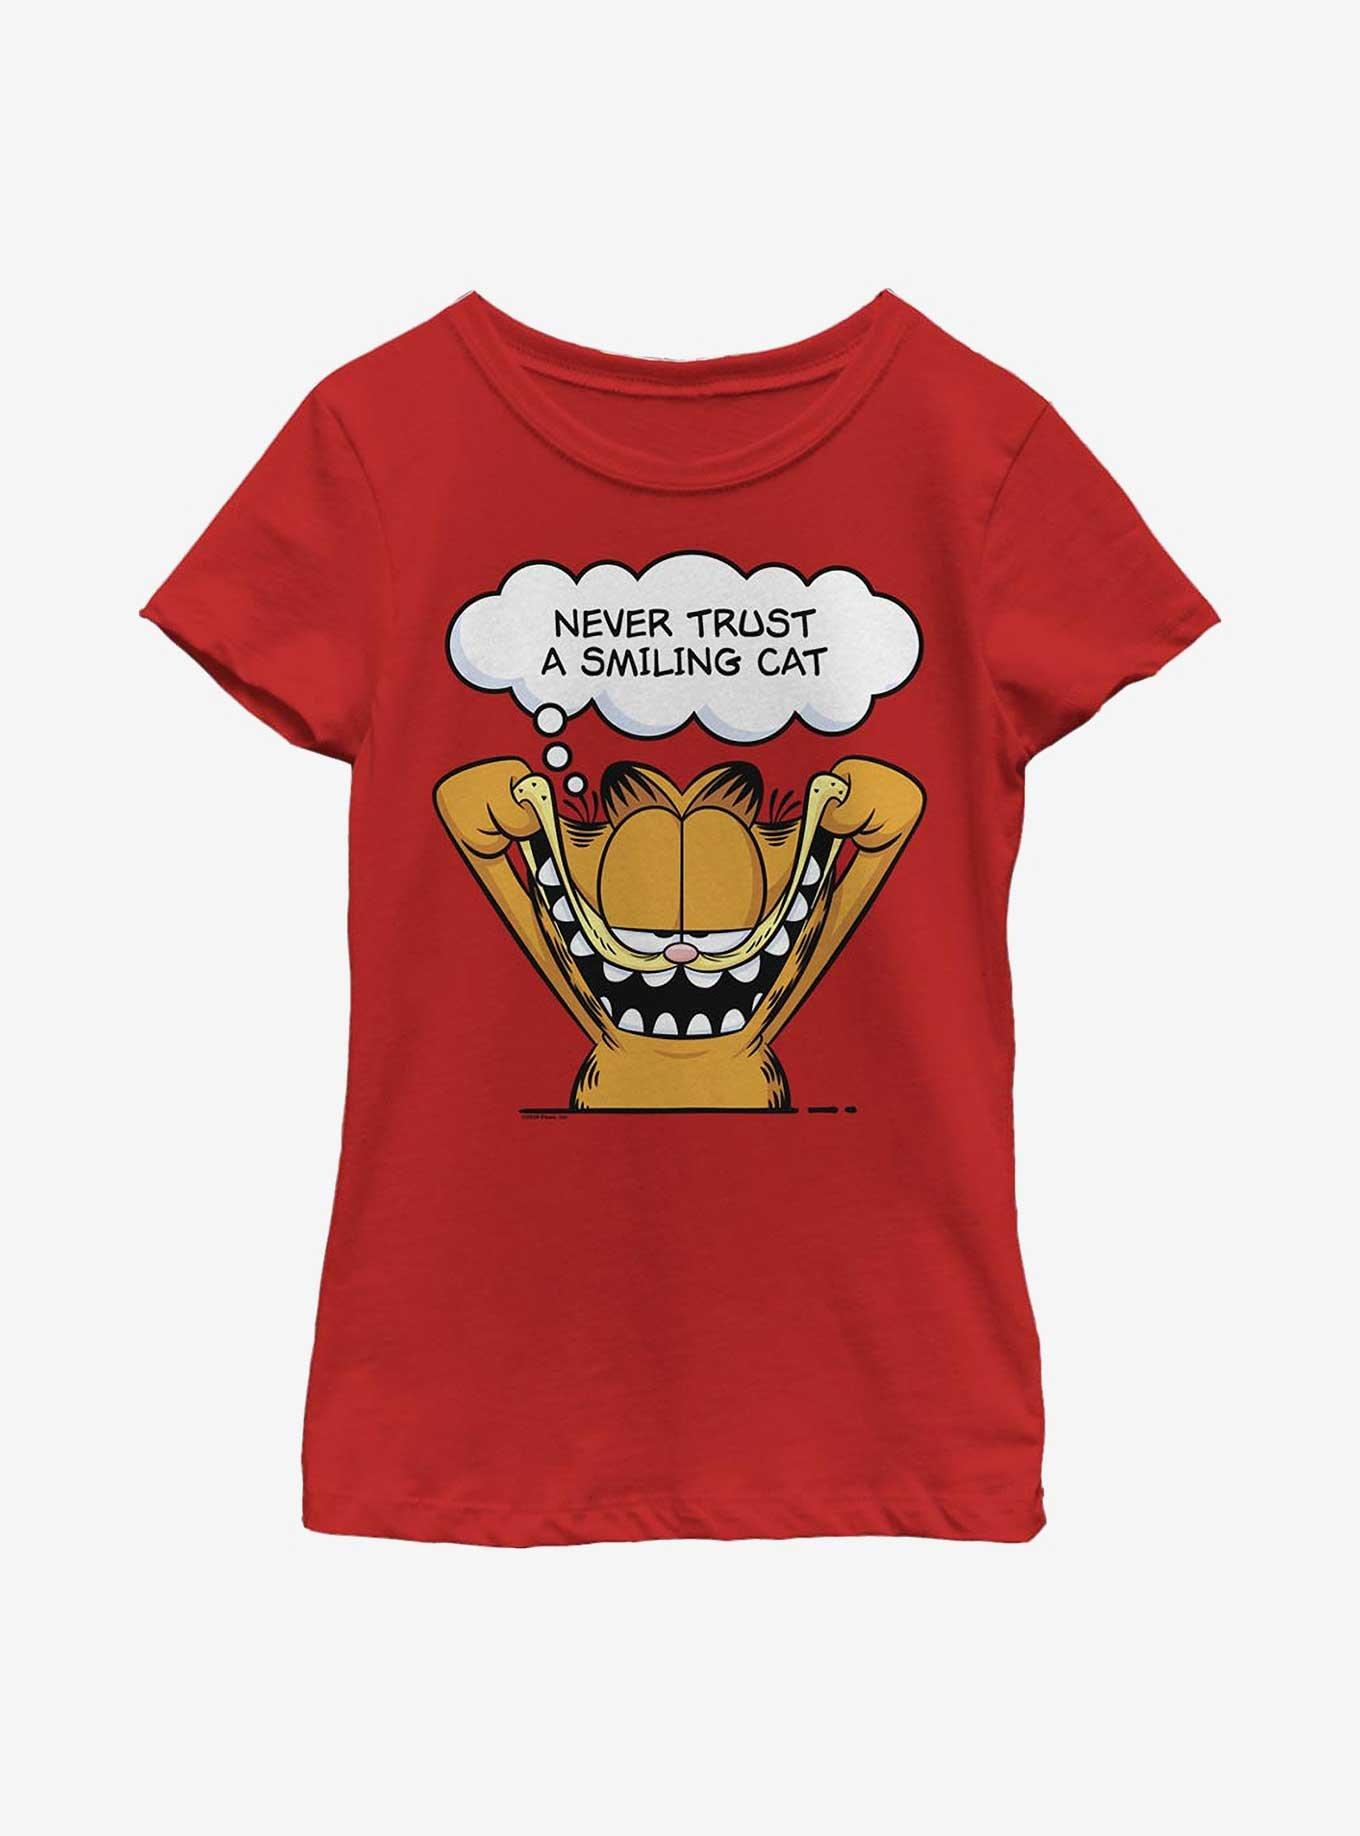 Garfield Never Trust A Smiling Cat Youth Girl's T-Shirt, RED, hi-res